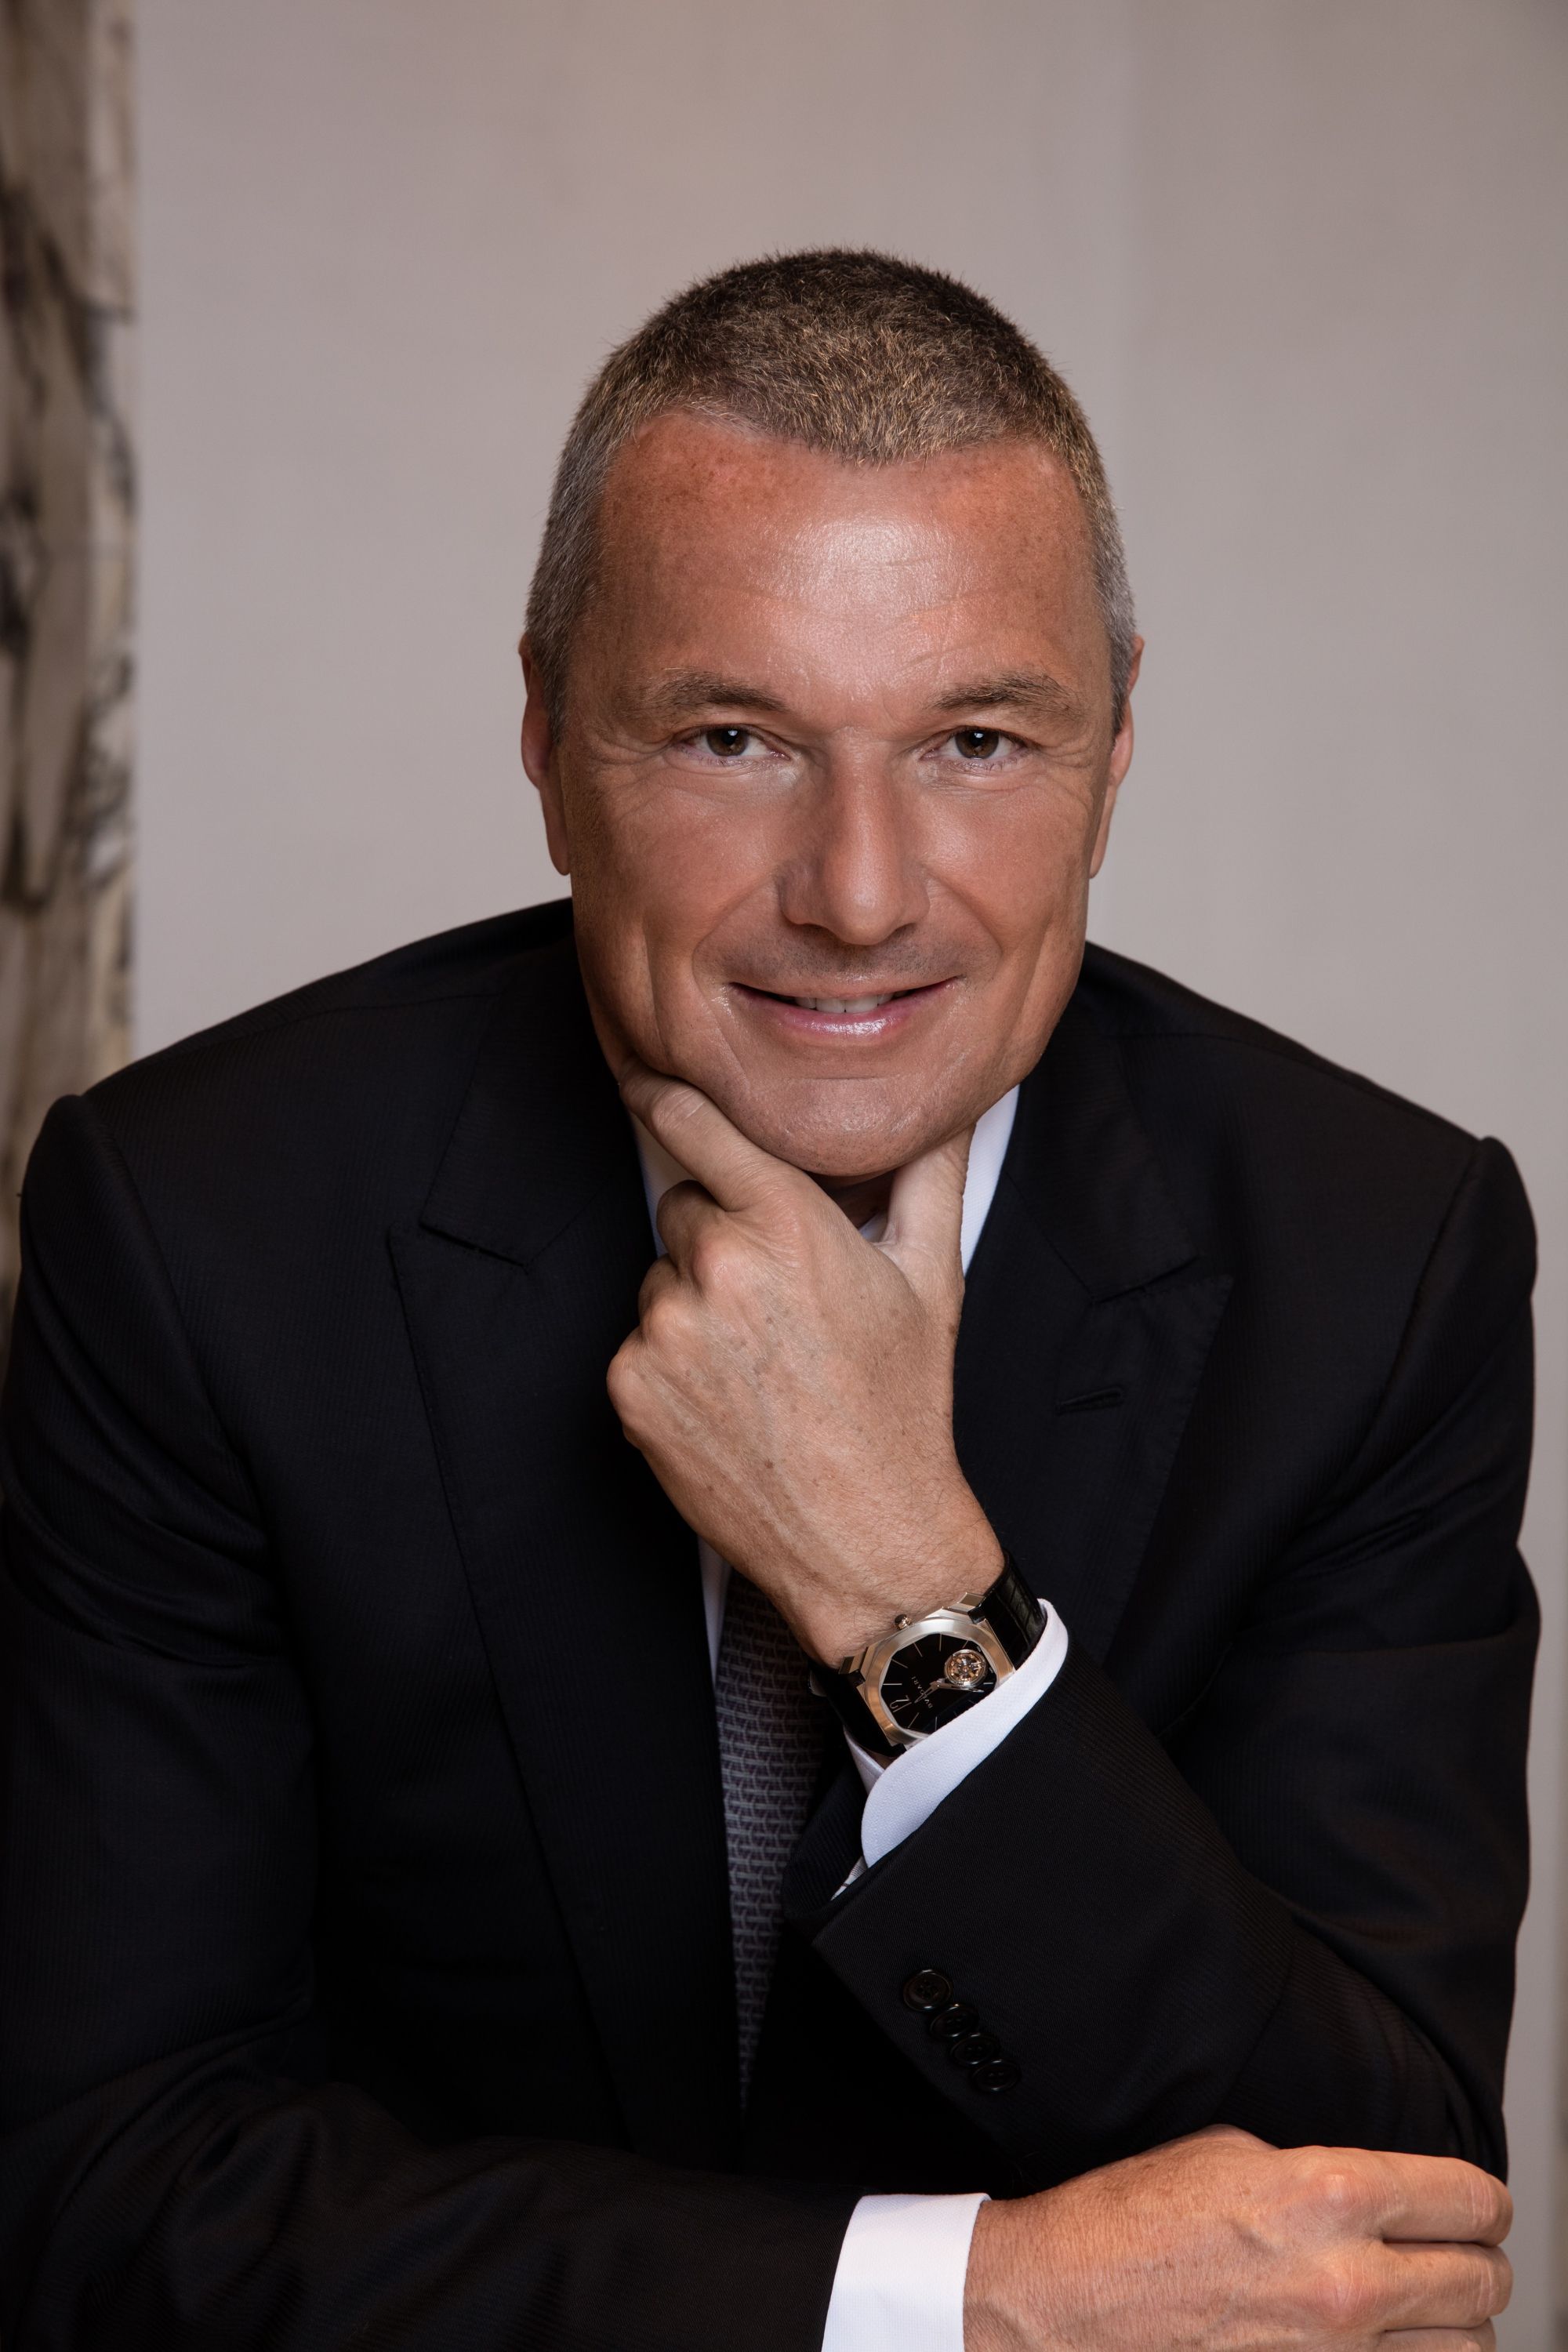 Outboard drink carve Bvlgari's CEO Jean Christophe Babin On Why He Loves The 1980s